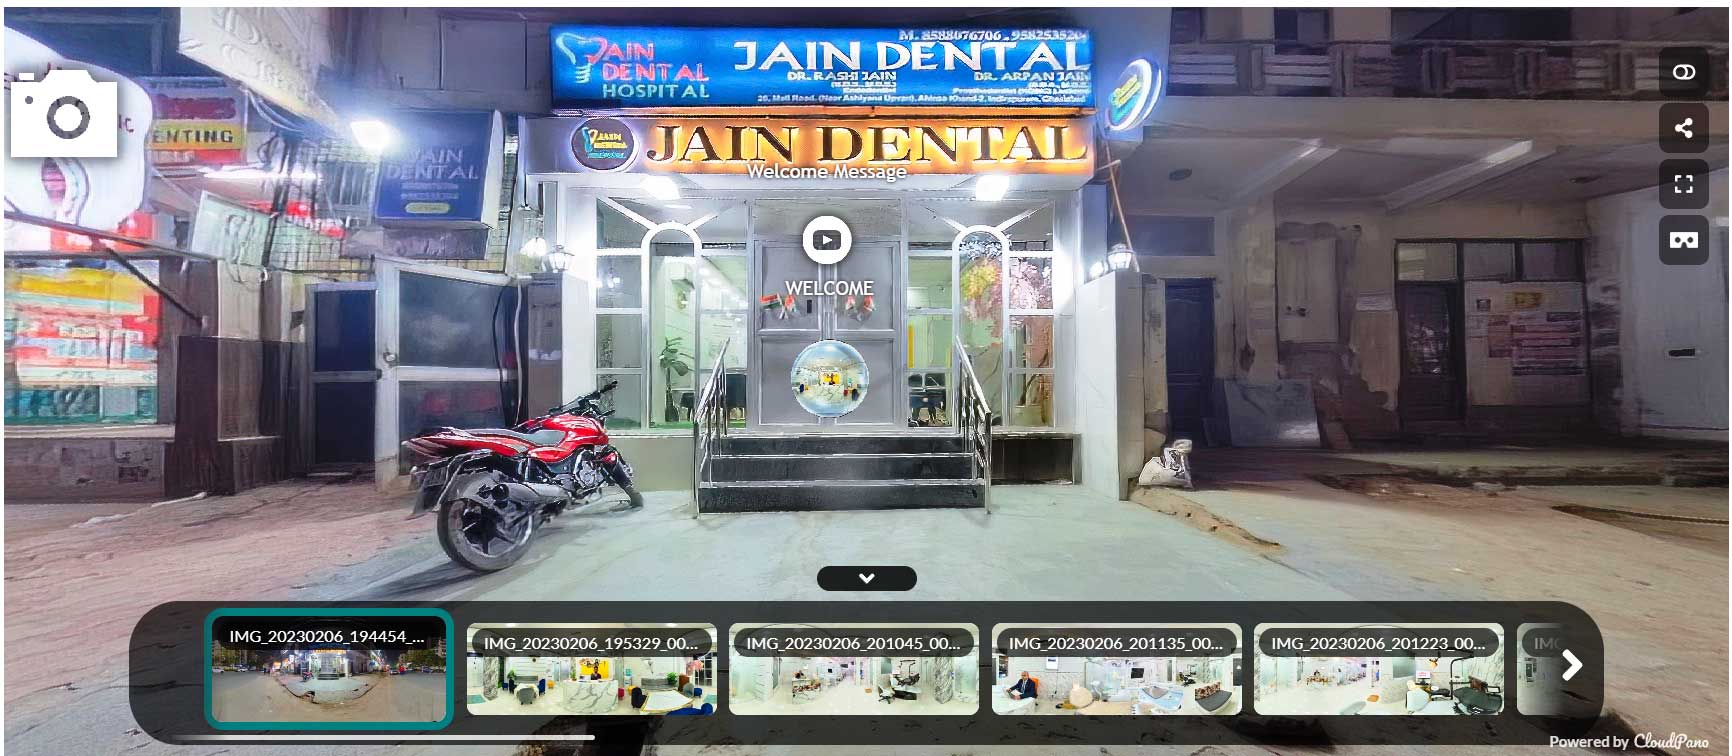 Featured image of a 360 Degree Virtual Tour of Jain dentist Clinic